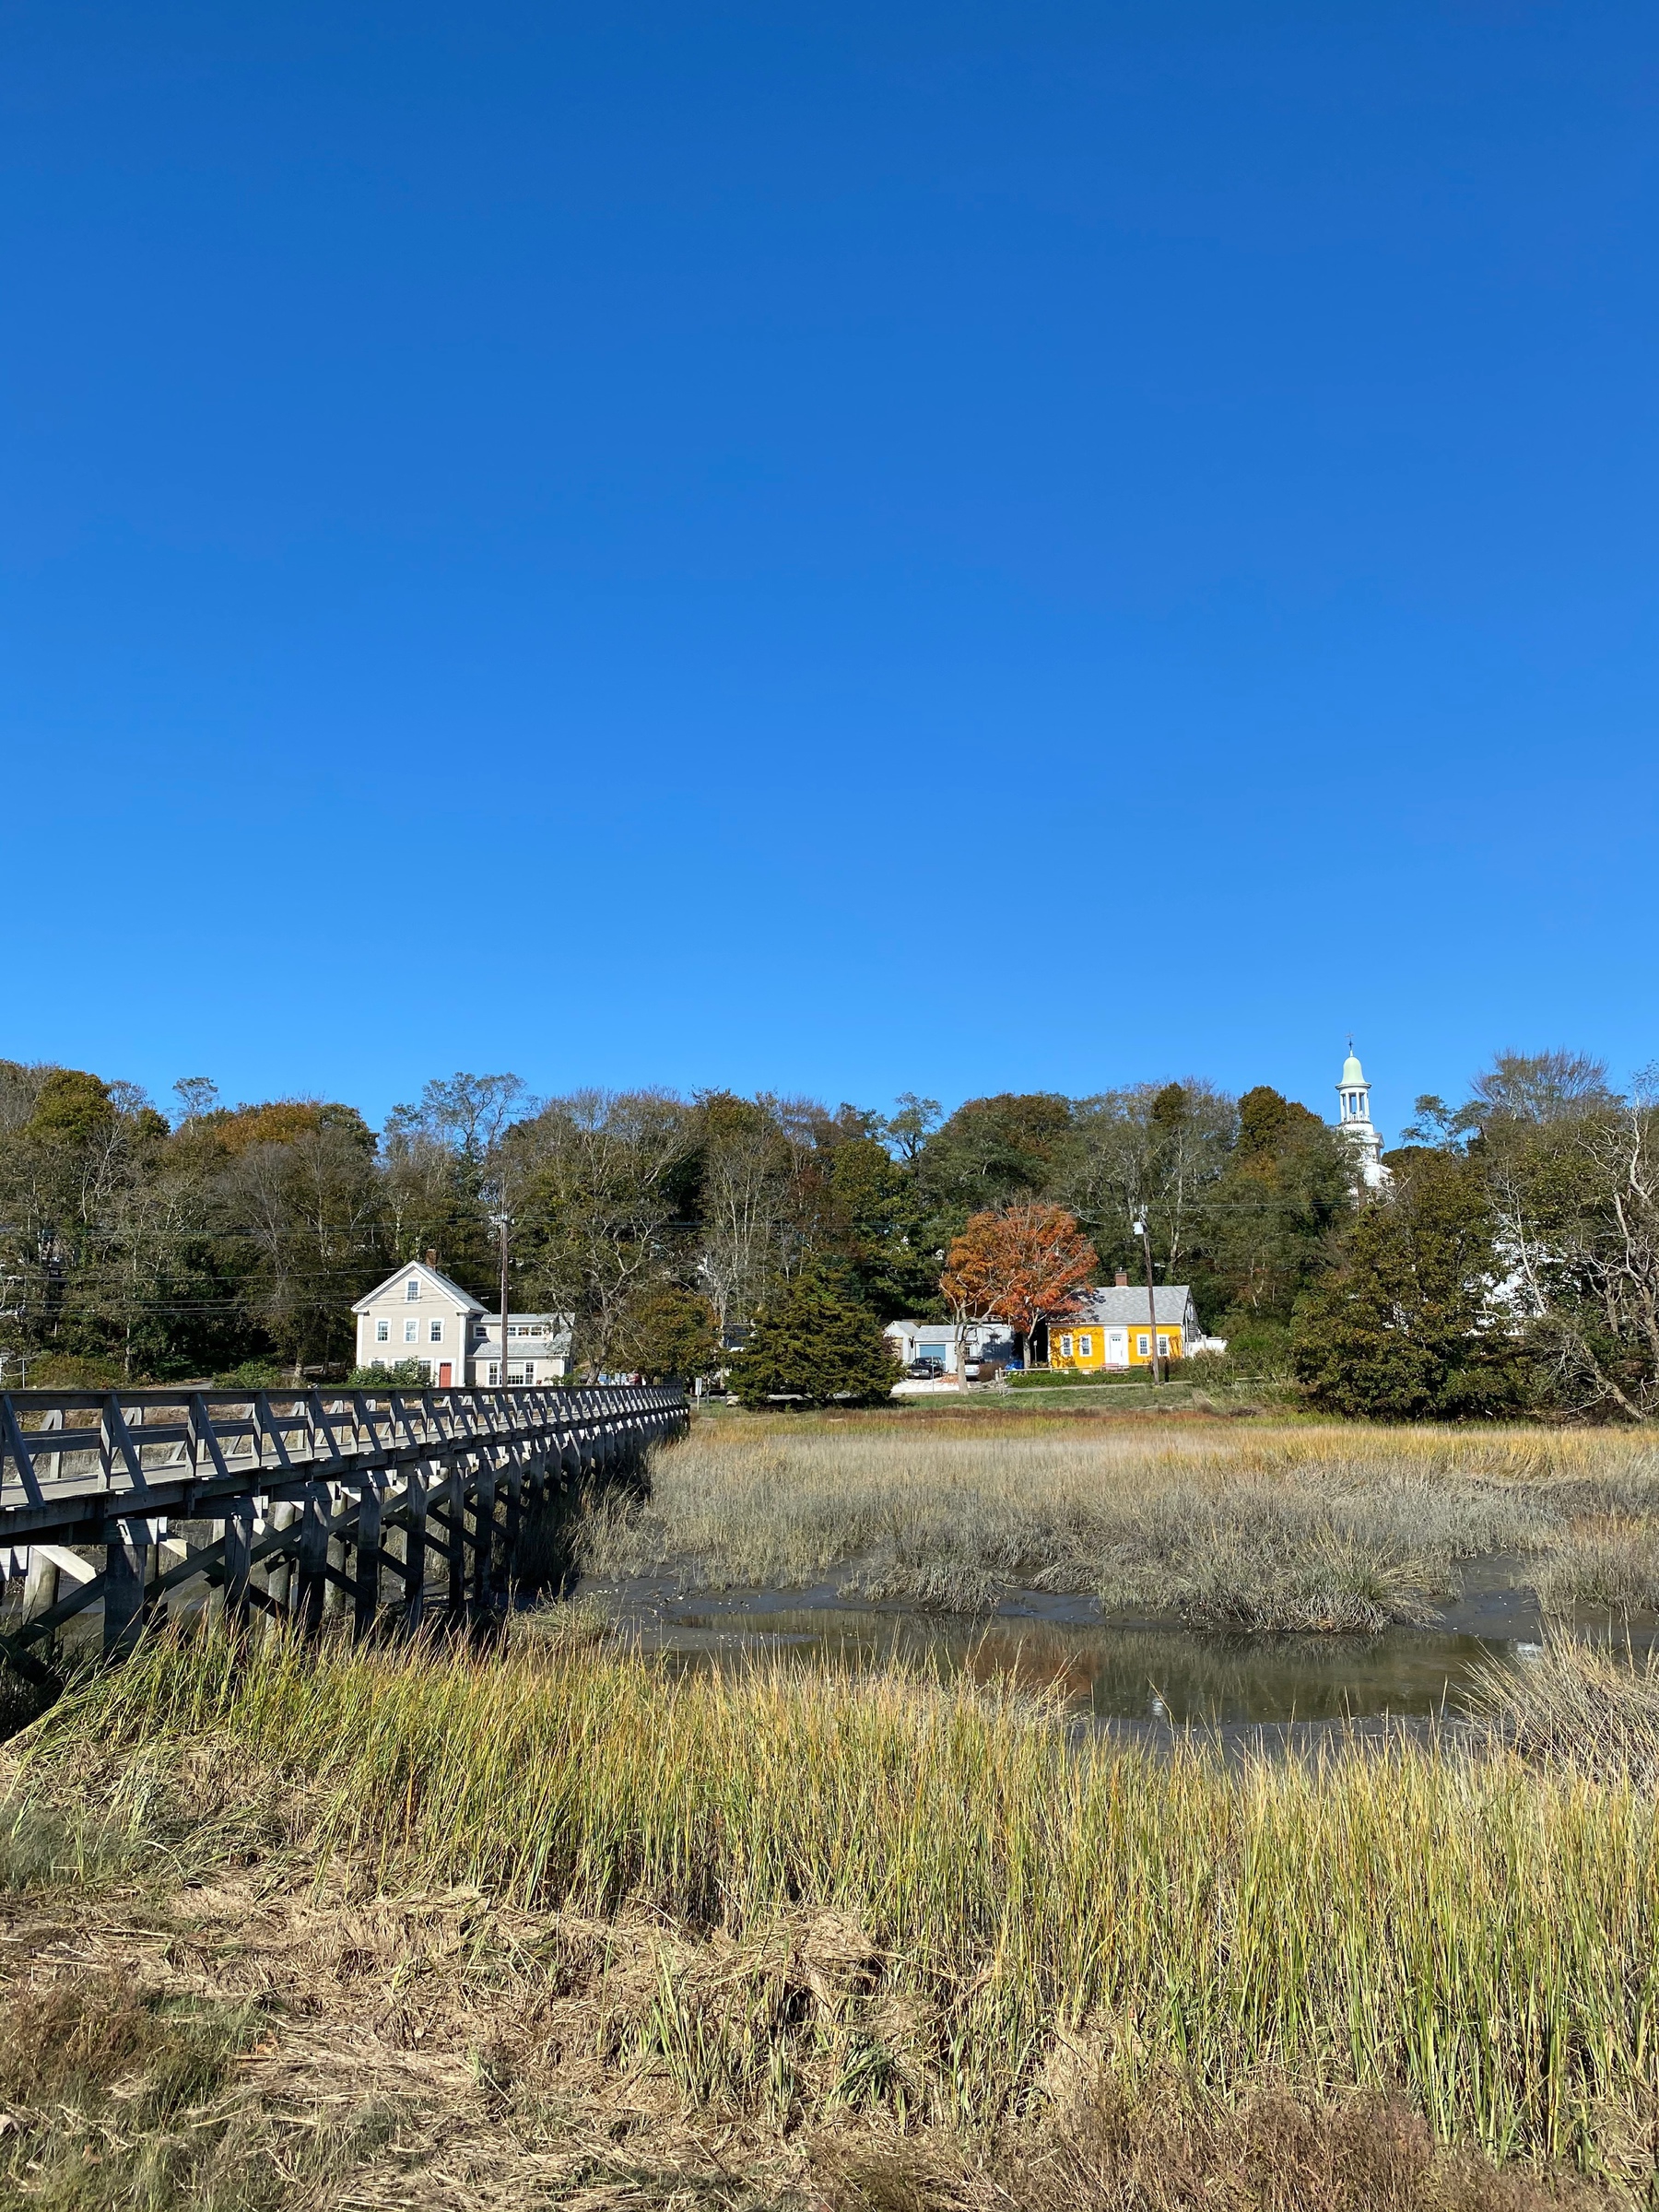 View of a wooden bridge over a creek, with buildings and a white church steeple on the far bank.